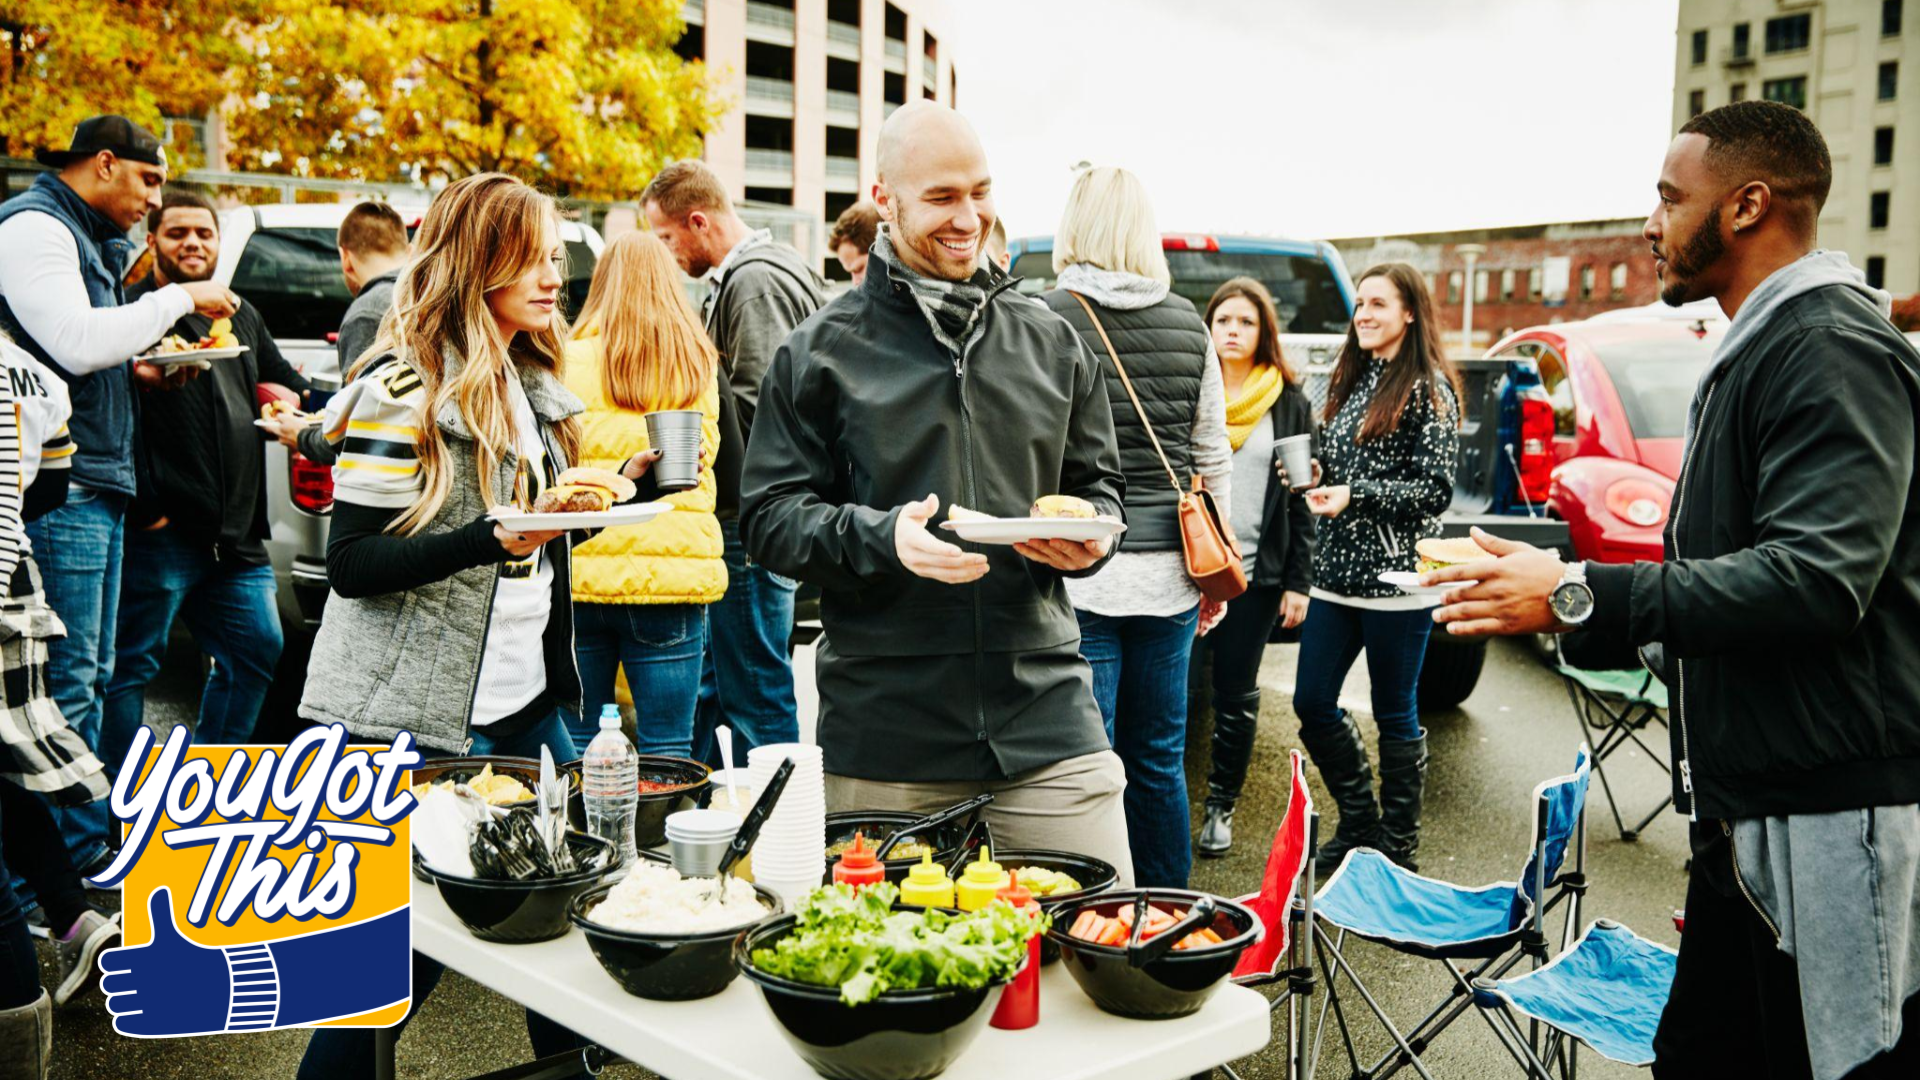 Guarantee your tailgate takes the W with these must-haves from Walmart